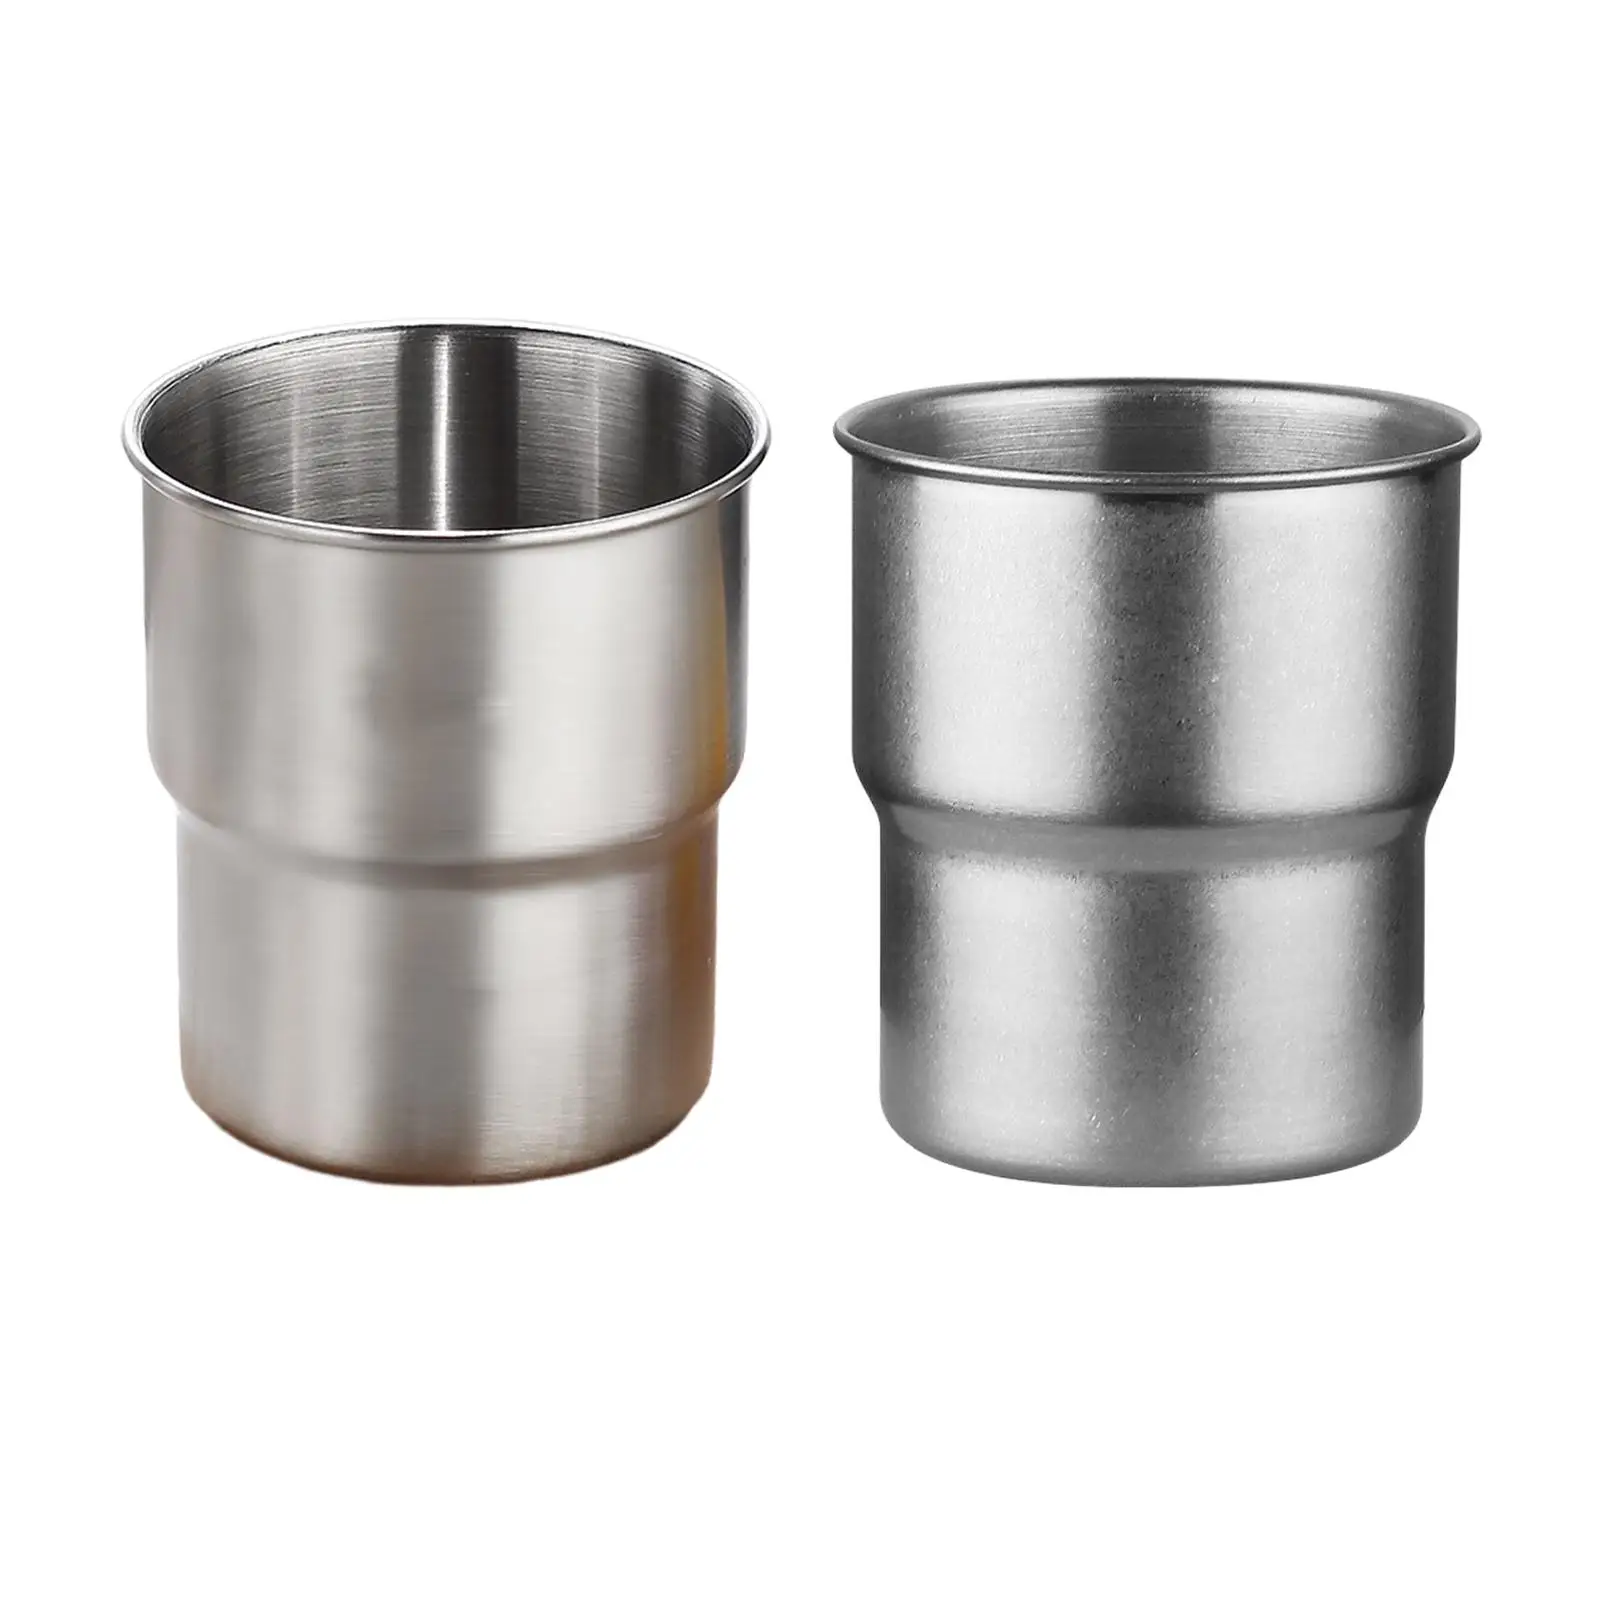 Stainless Steel Cup 300ml Drinking Tumblers Premium Metal Drinking Glasses Beer Cups for Picnic Travel Restaurant Camping